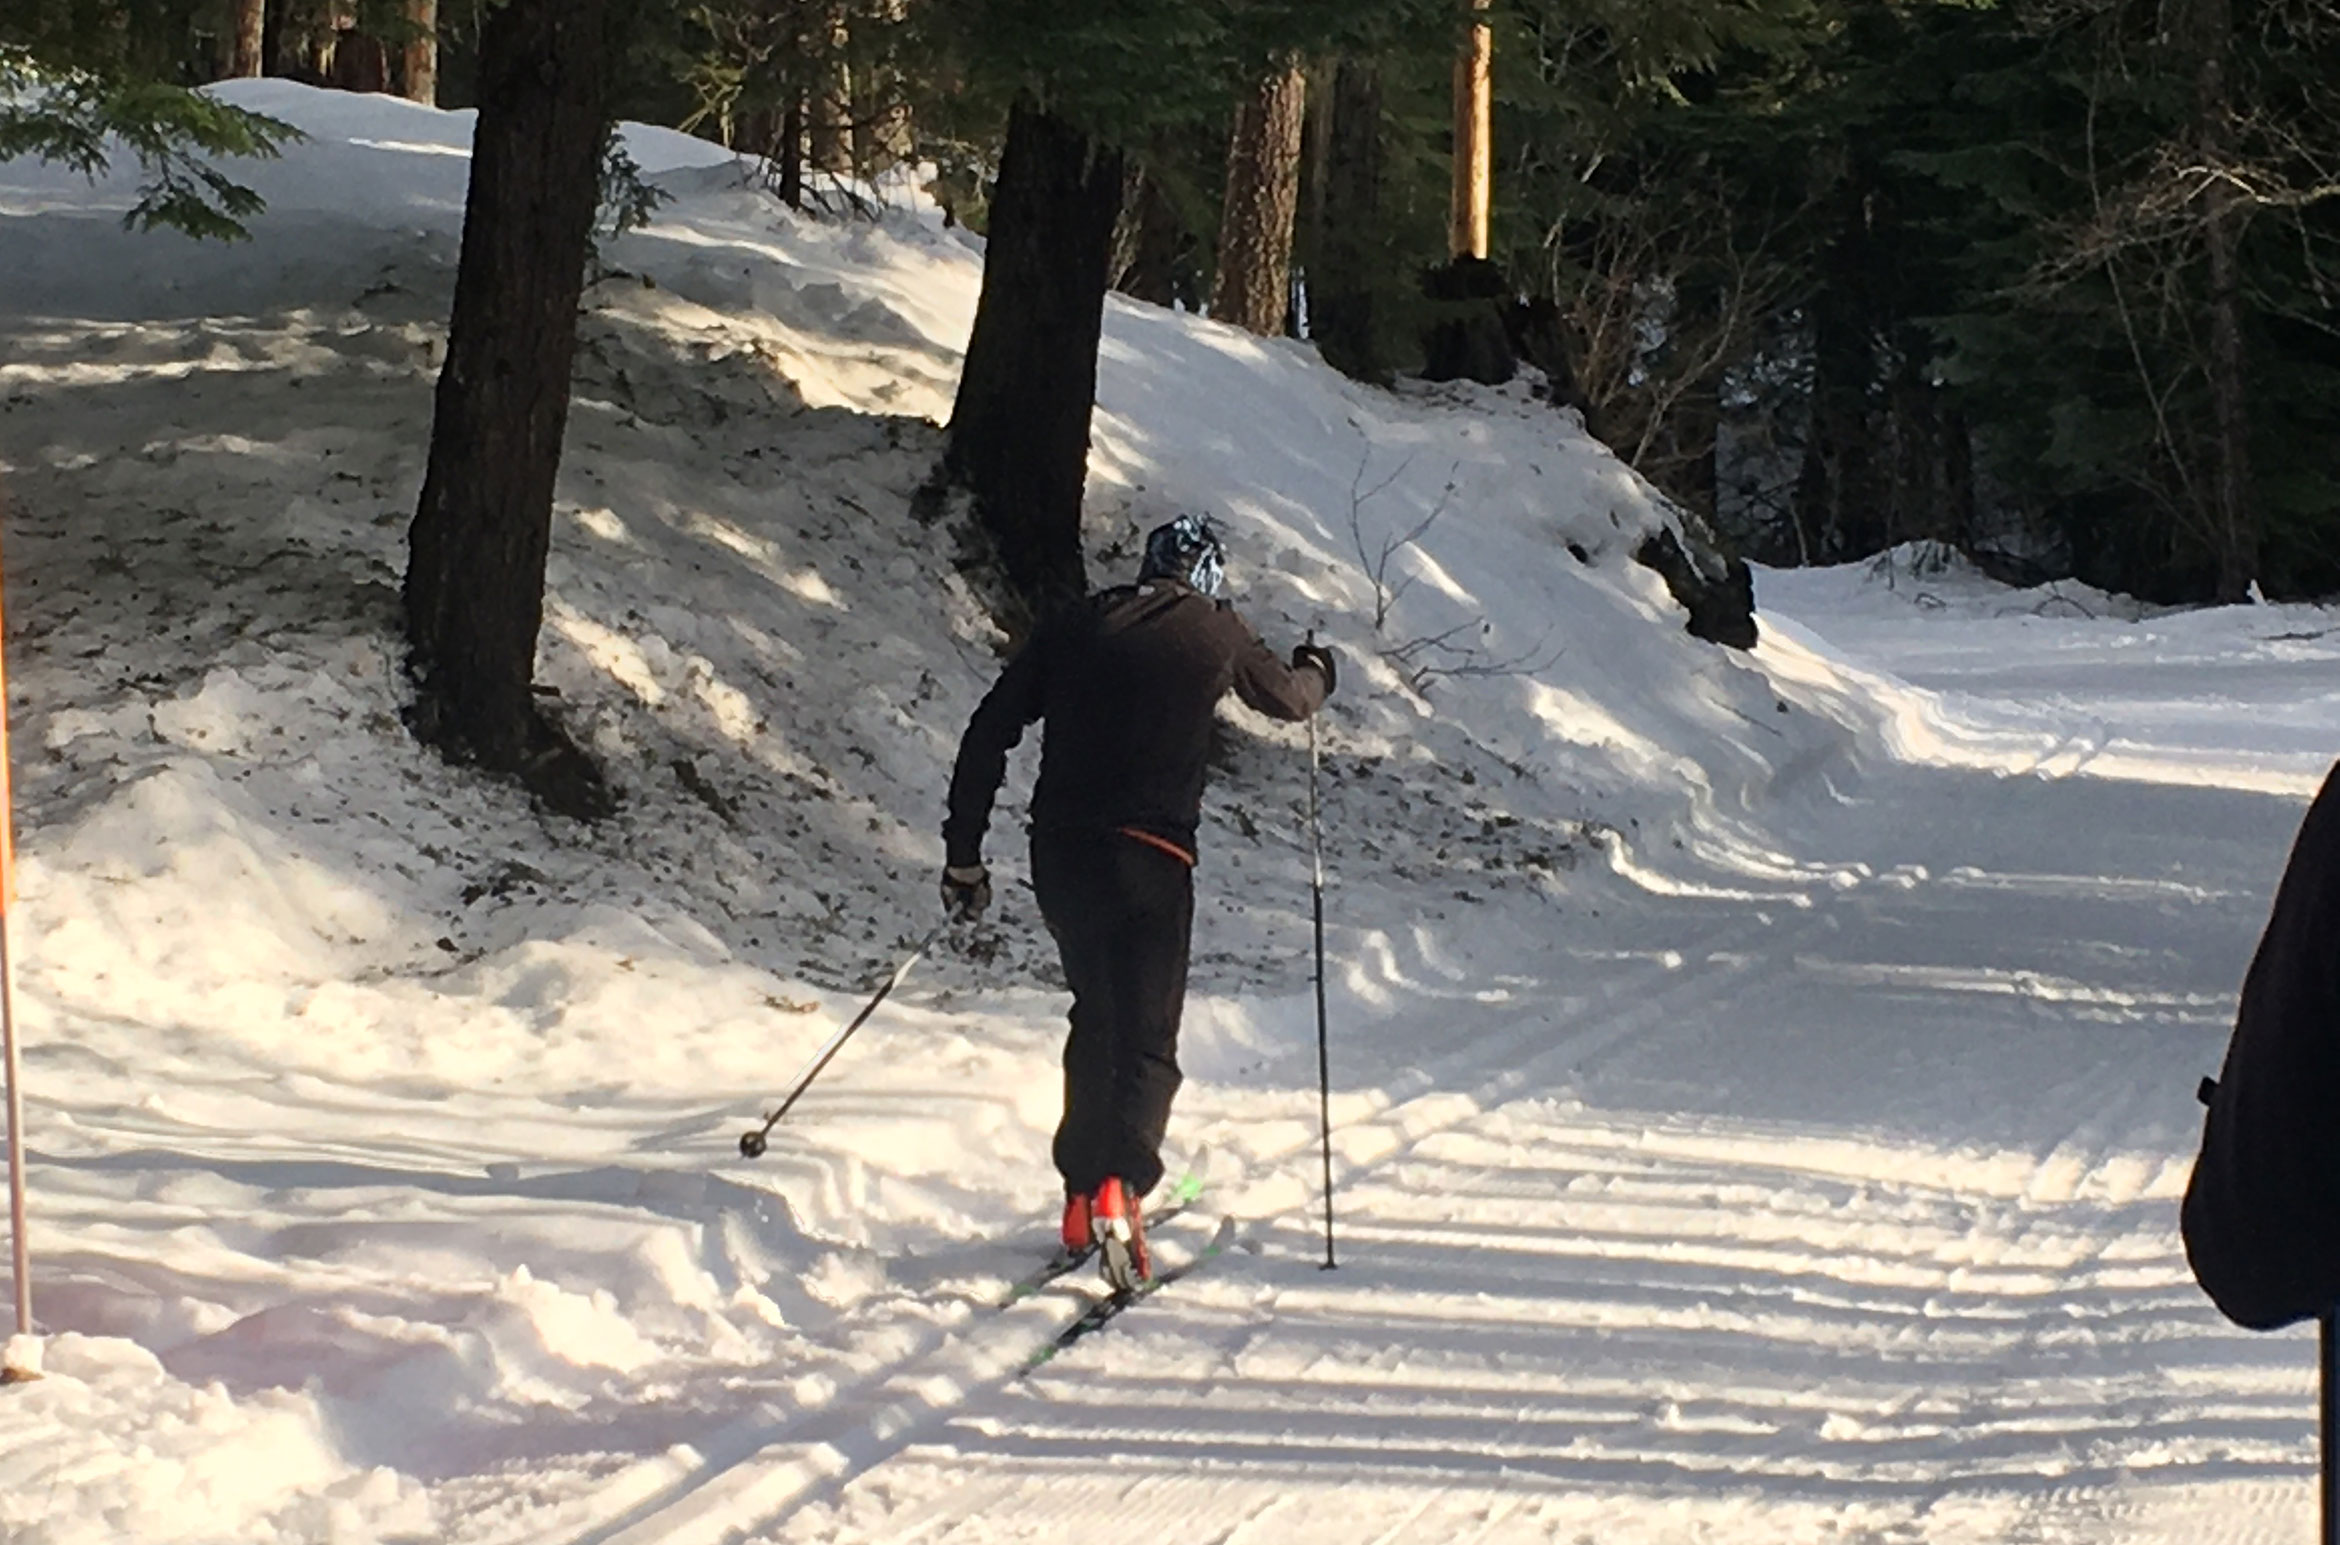 Bob demonstrates techniques for cross-country skiing.